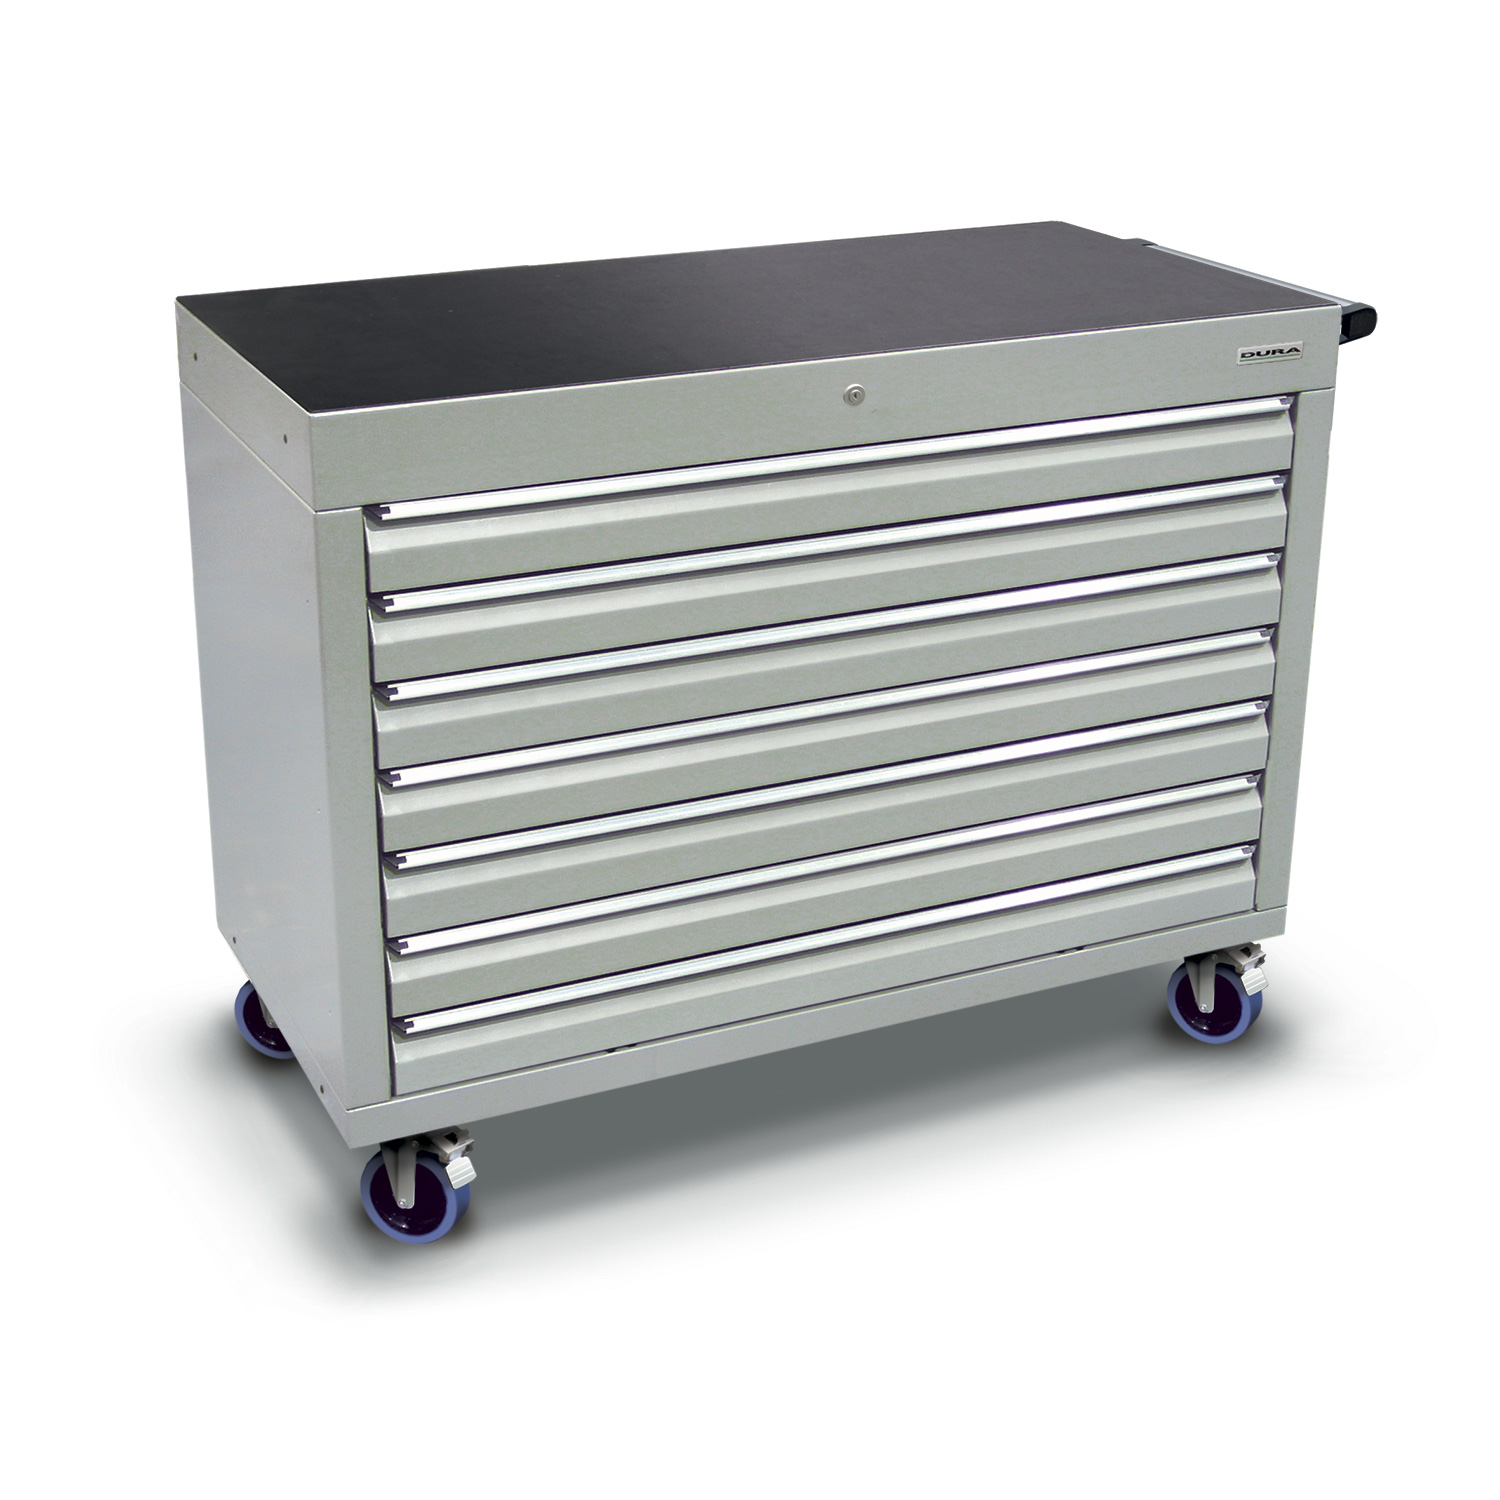 1200 series cabinet with 7 drawers